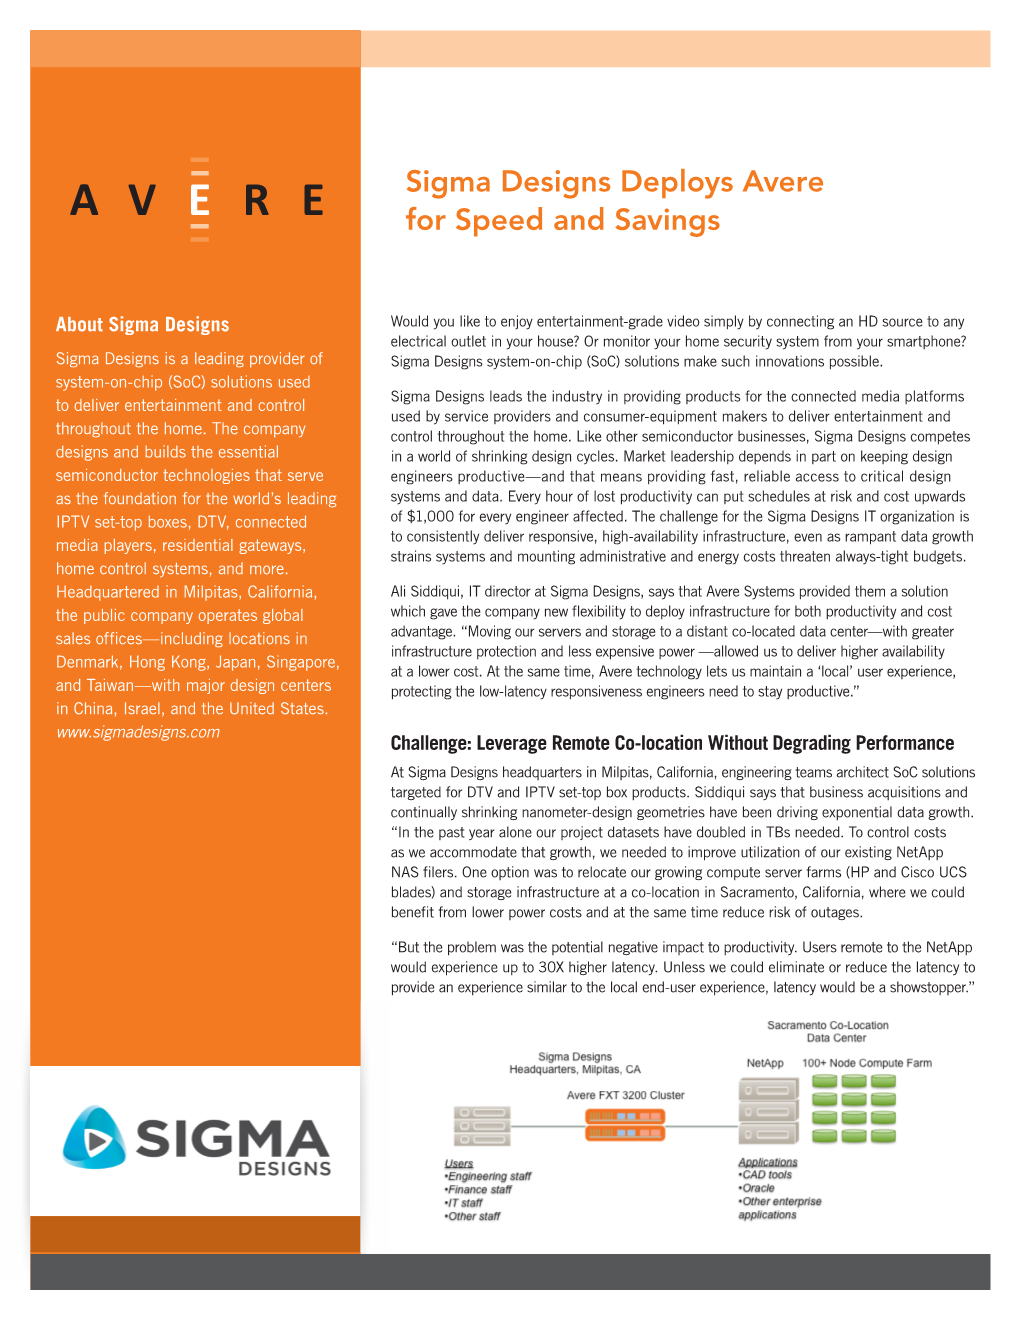 Sigma Designs Deploys Avere for Speed and Savings